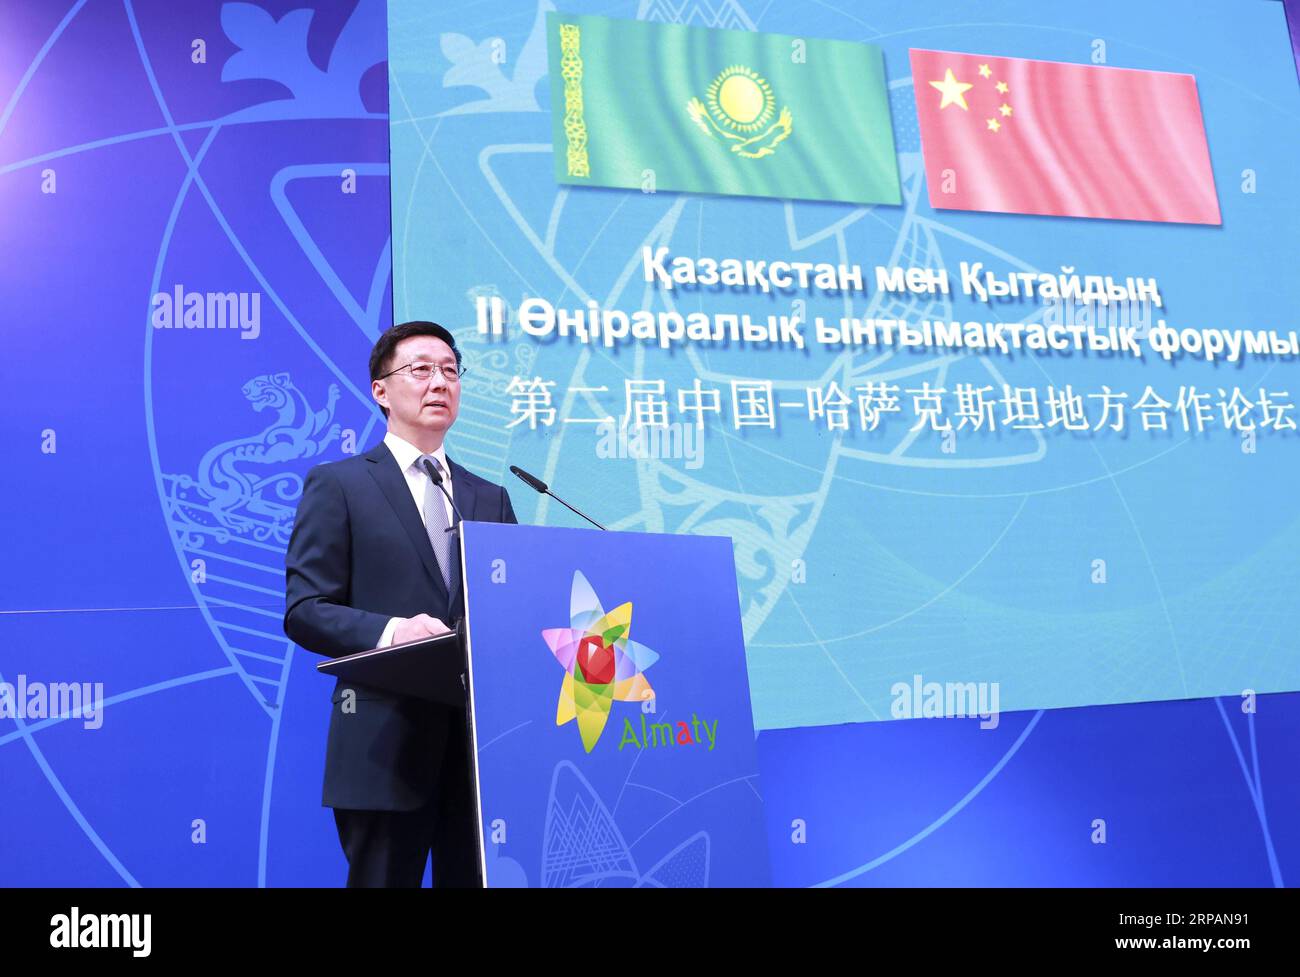 (190515) -- ALMATY, May 15, 2019 (Xinhua) -- Chinese Vice Premier Han Zheng, also a member of the Standing Committee of the Political Bureau of the Communist Party of China Central Committee, attends the Second China-Kazakhstan Local Cooperation Forum held in Almaty, Kazakhstan, May 15, 2019. (Xinhua/Pang Xinglei) KAZAKHSTAN-ALMATY-HAN ZHENG-FORUM PUBLICATIONxNOTxINxCHN Stock Photo